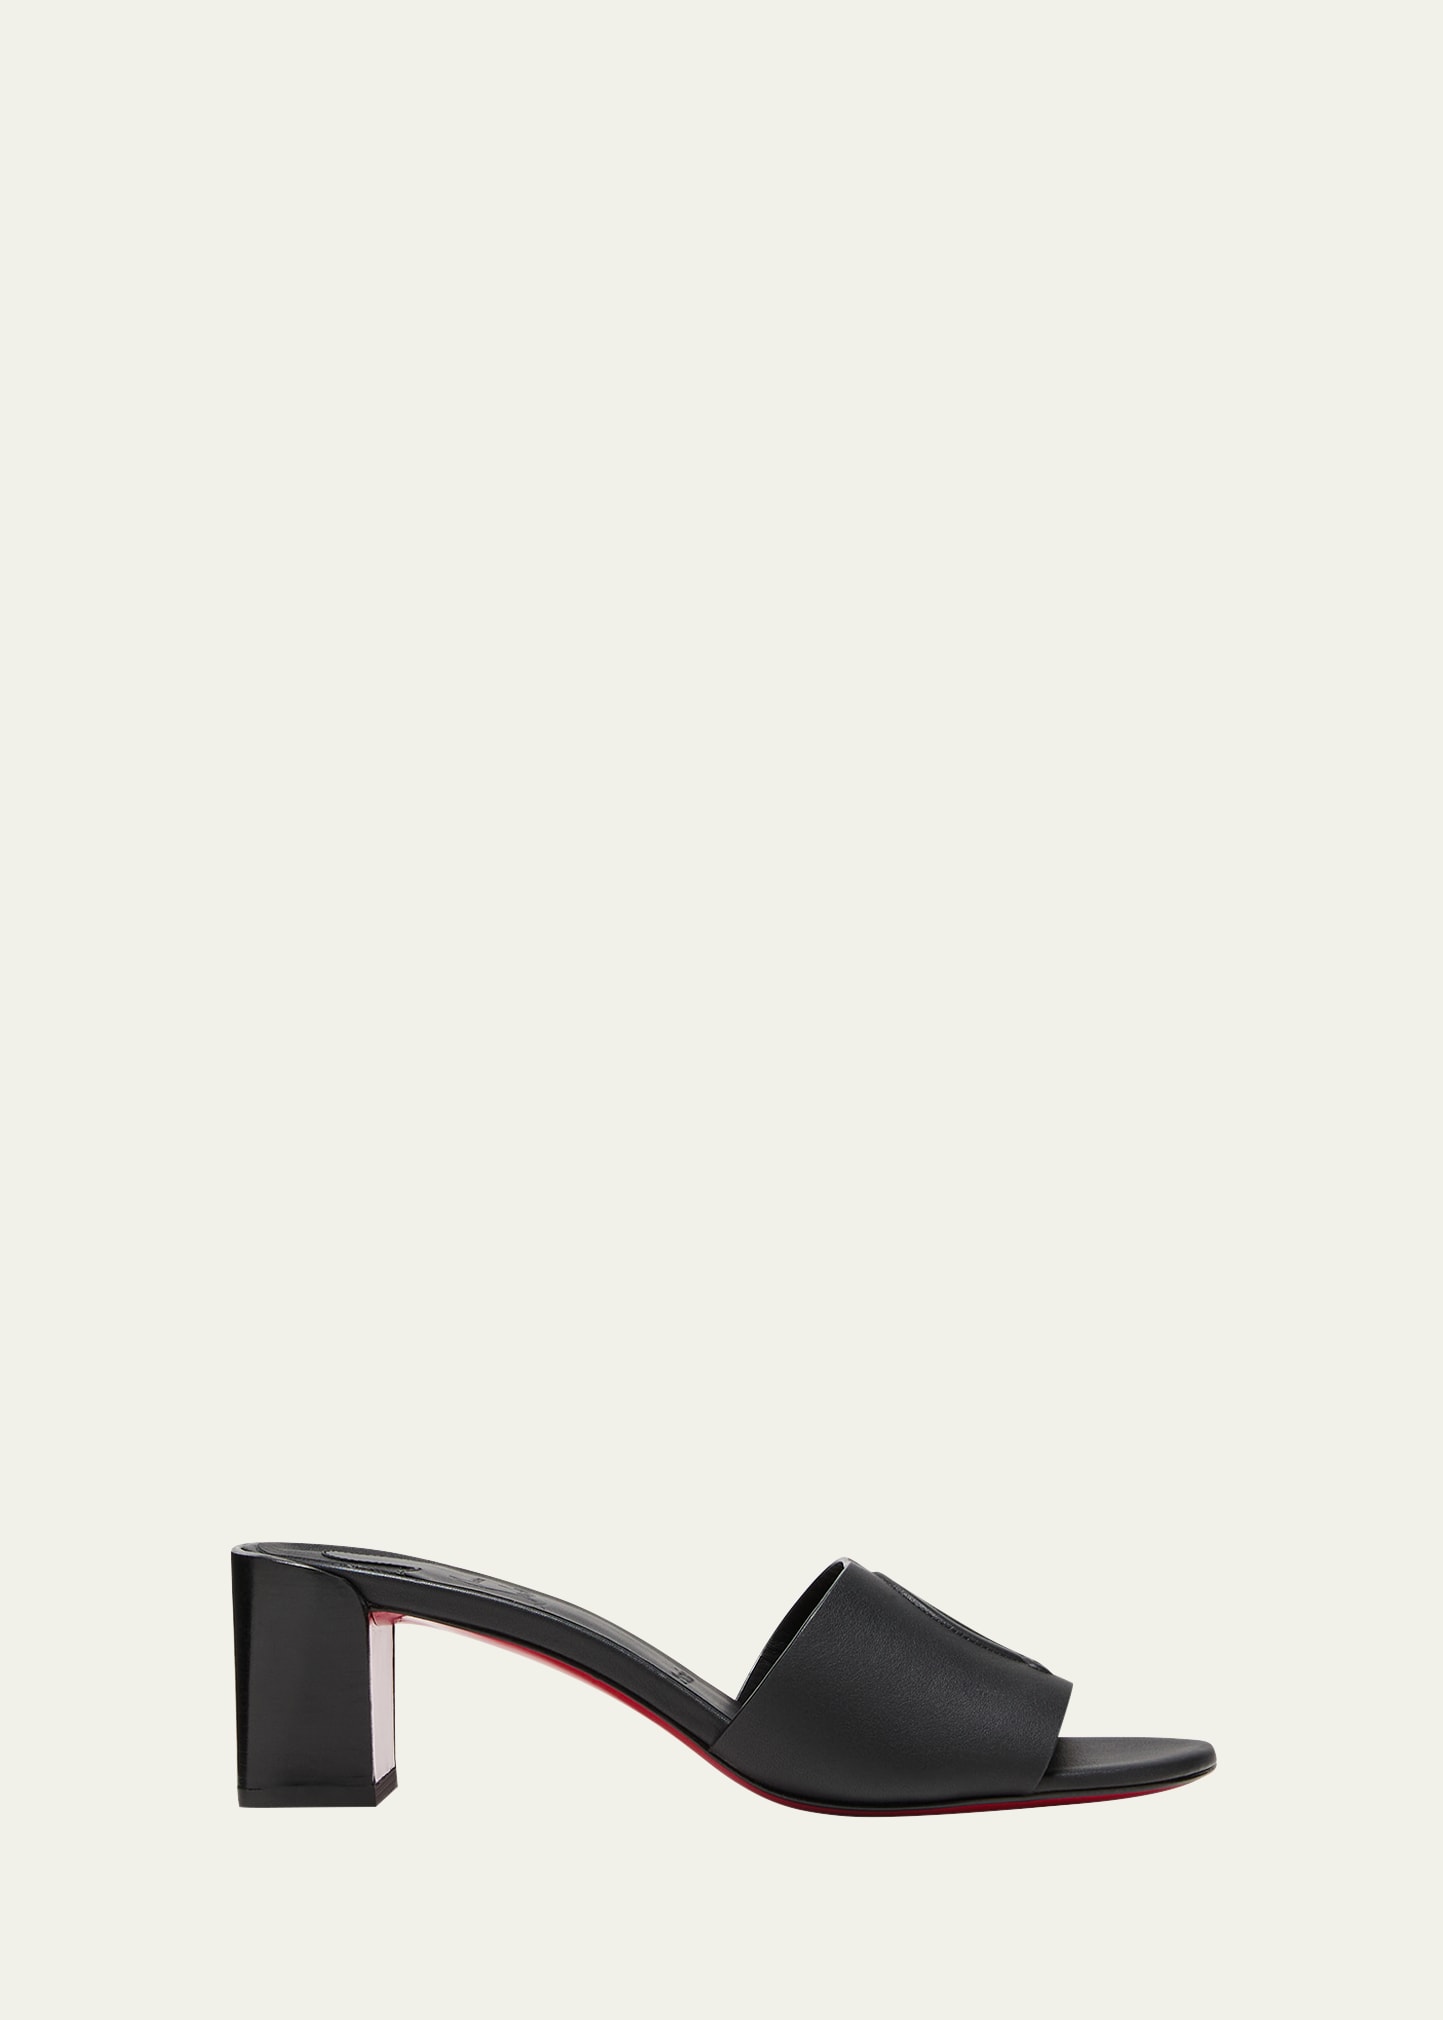 CHRISTIAN LOUBOUTIN LEATHER LOGO RED SOLE MULE SANDALS